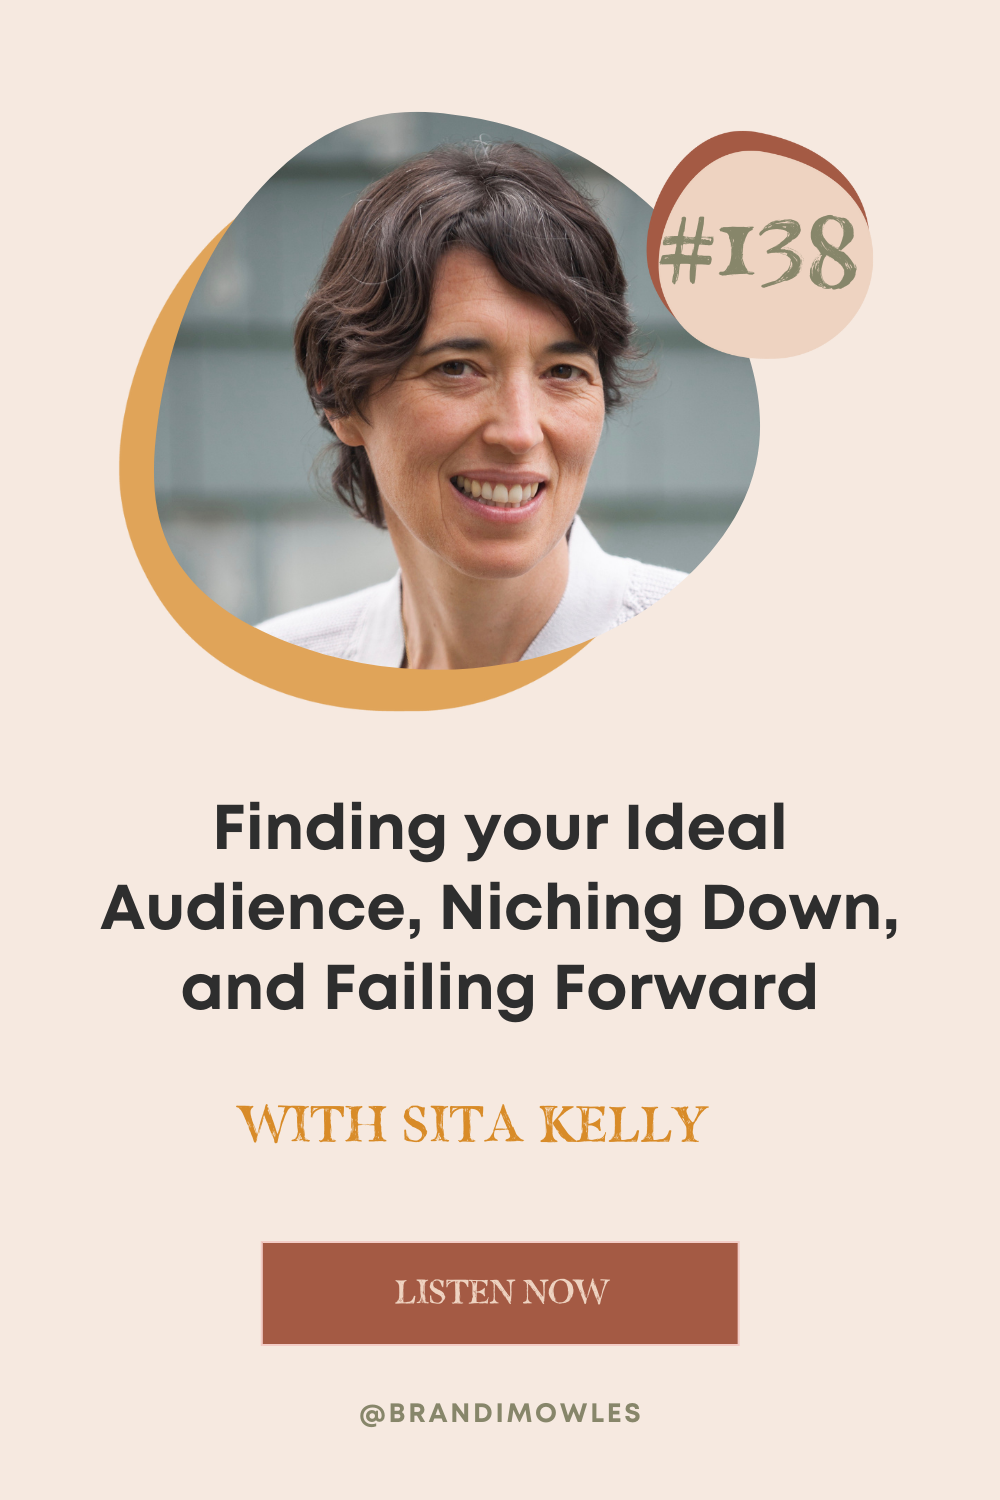 Image of Sita Kelly on featured graphic for Serve Scale Soar® podcast